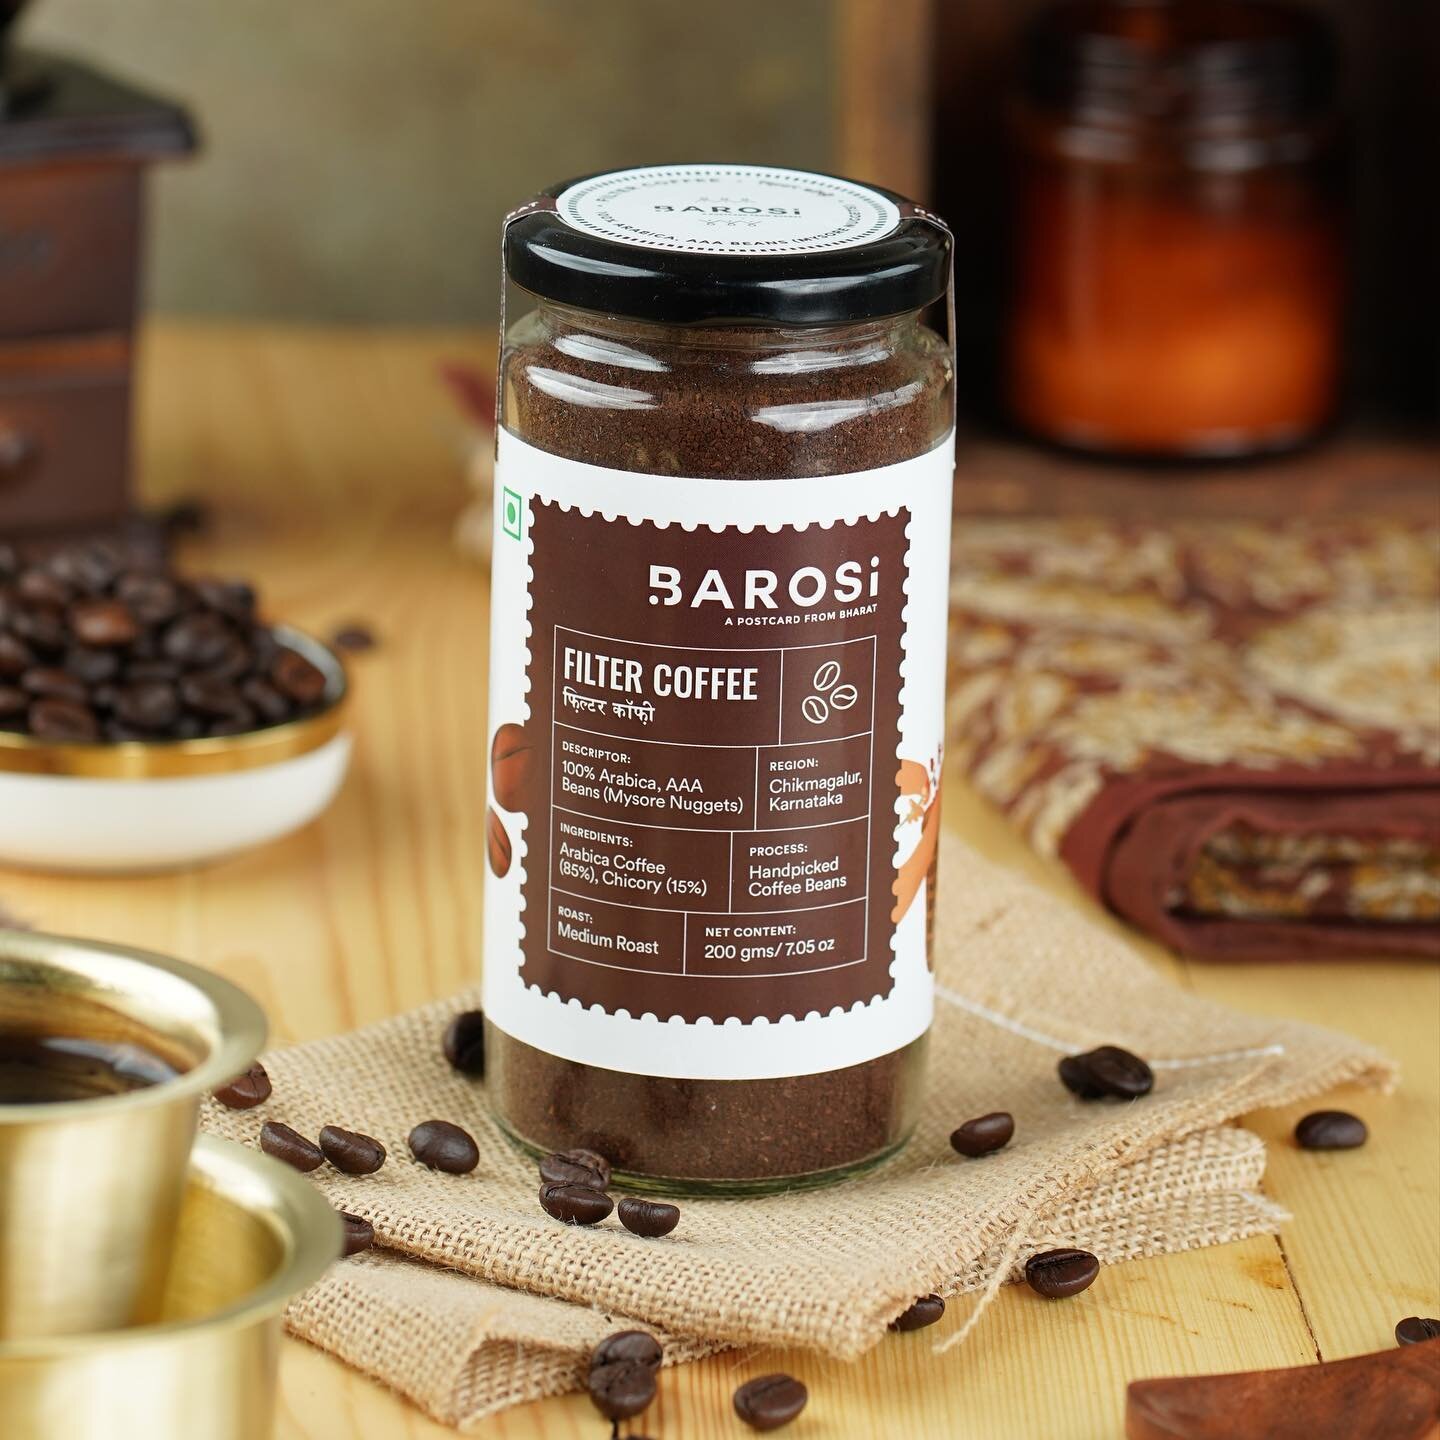 A postcard from Bharat!
&bull;
@barosifarms is a brand rooted in their traditions, filled with goodness, made authentically &amp; traditionally and truly good for you deserved their story to be told!
&bull;
&bull;
All Barosi's products are made in di